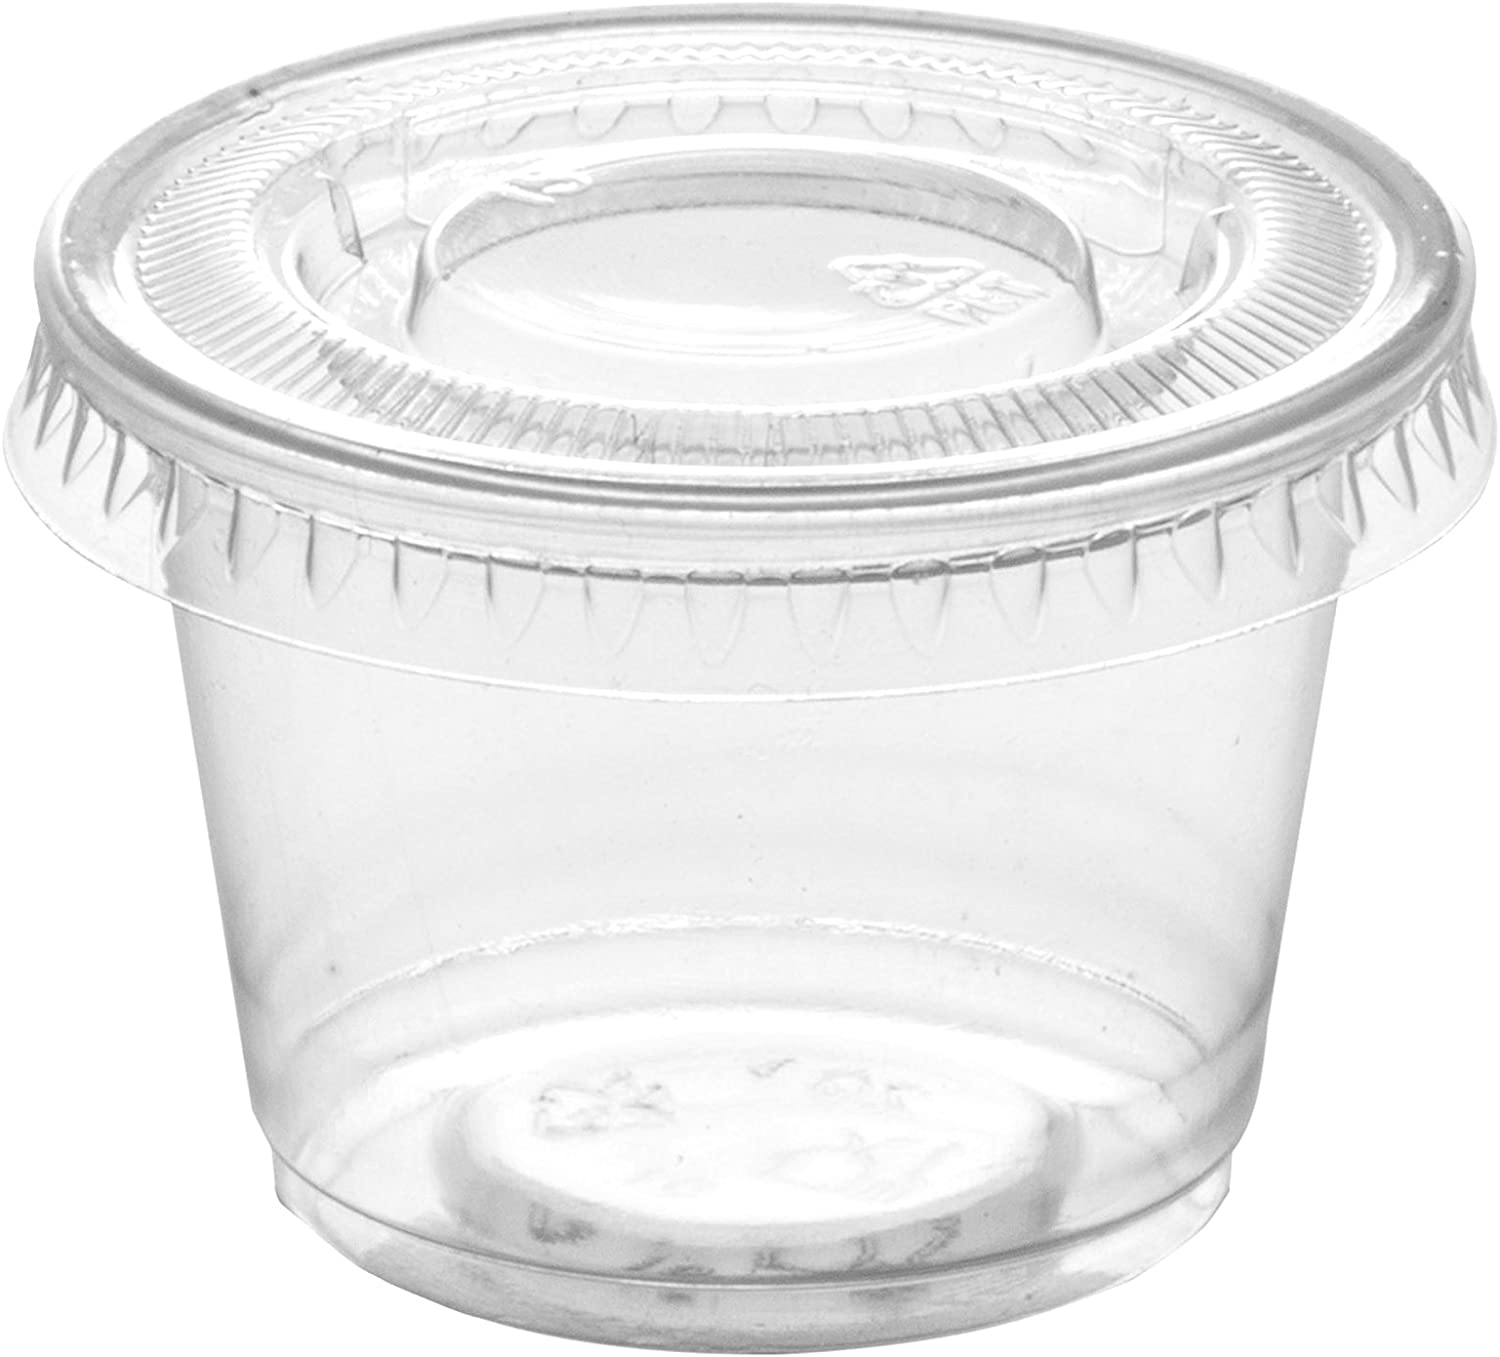 Kimmel 21-000-2001-1 Childs Tableware Cup Plastic White 